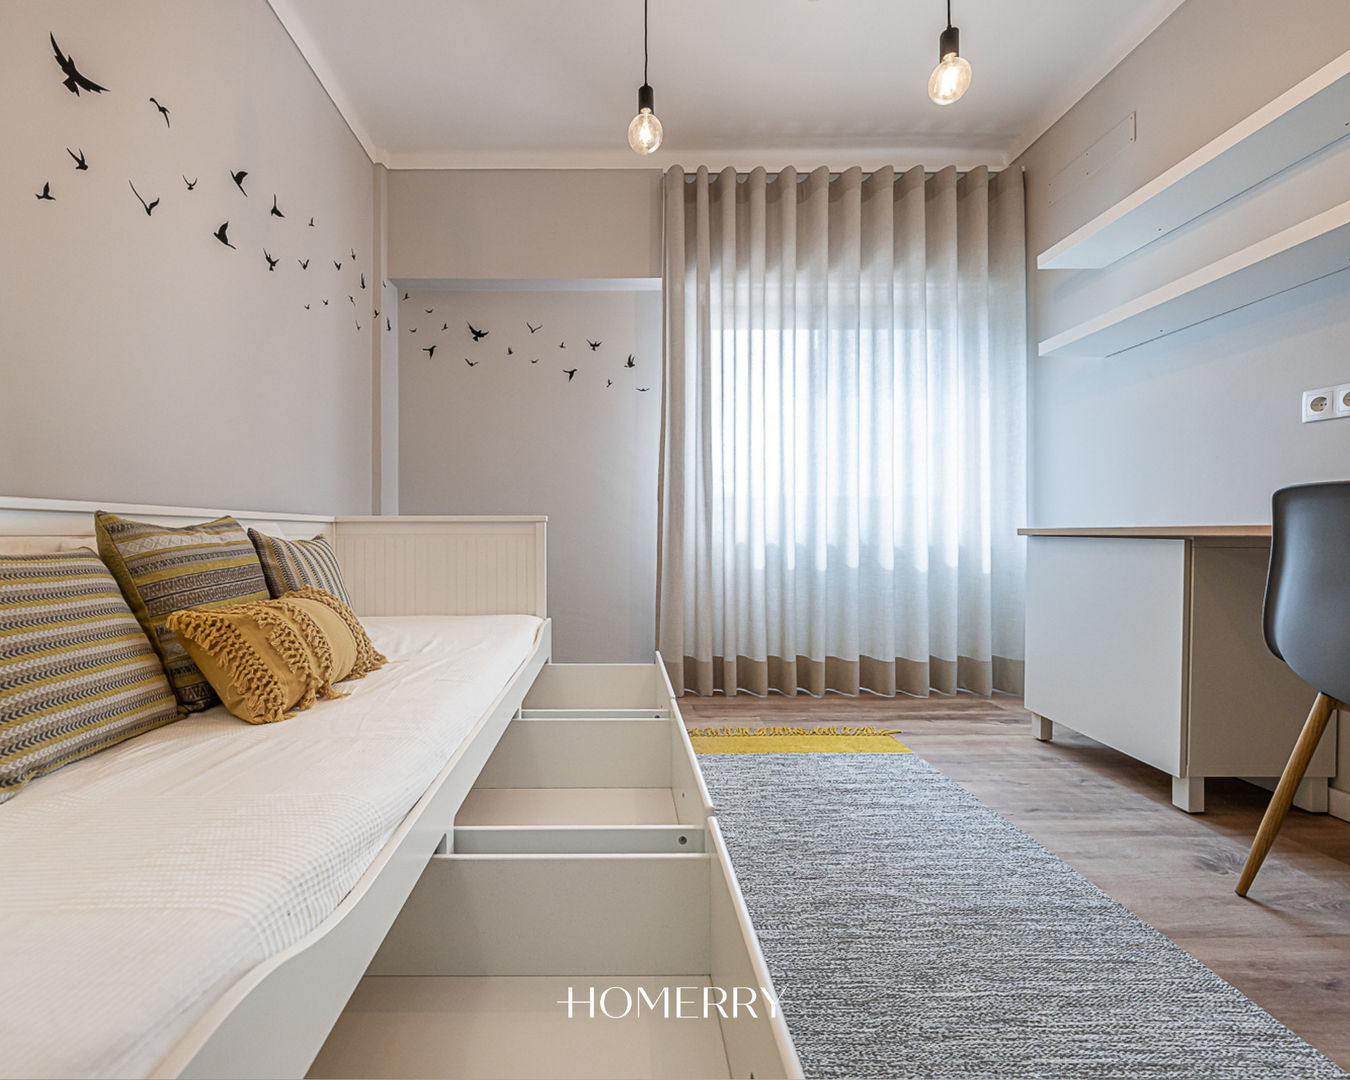 Portugal waits for you. A lovely 2beds in Estoril., HOMERRY HOMERRY Modern style bedroom